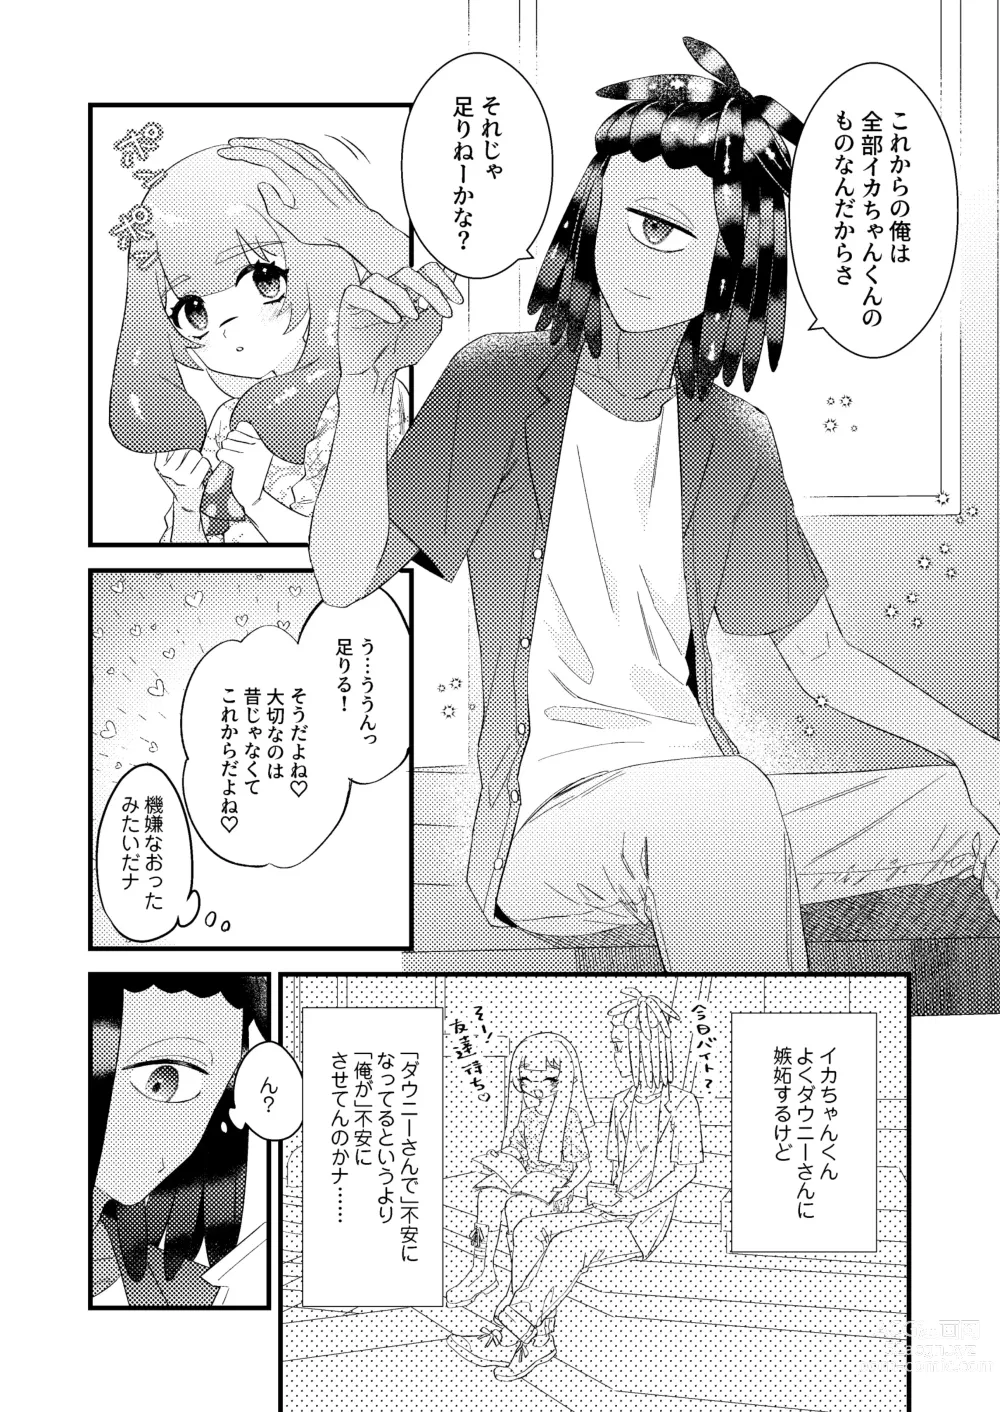 Page 6 of doujinshi Baby I Love You